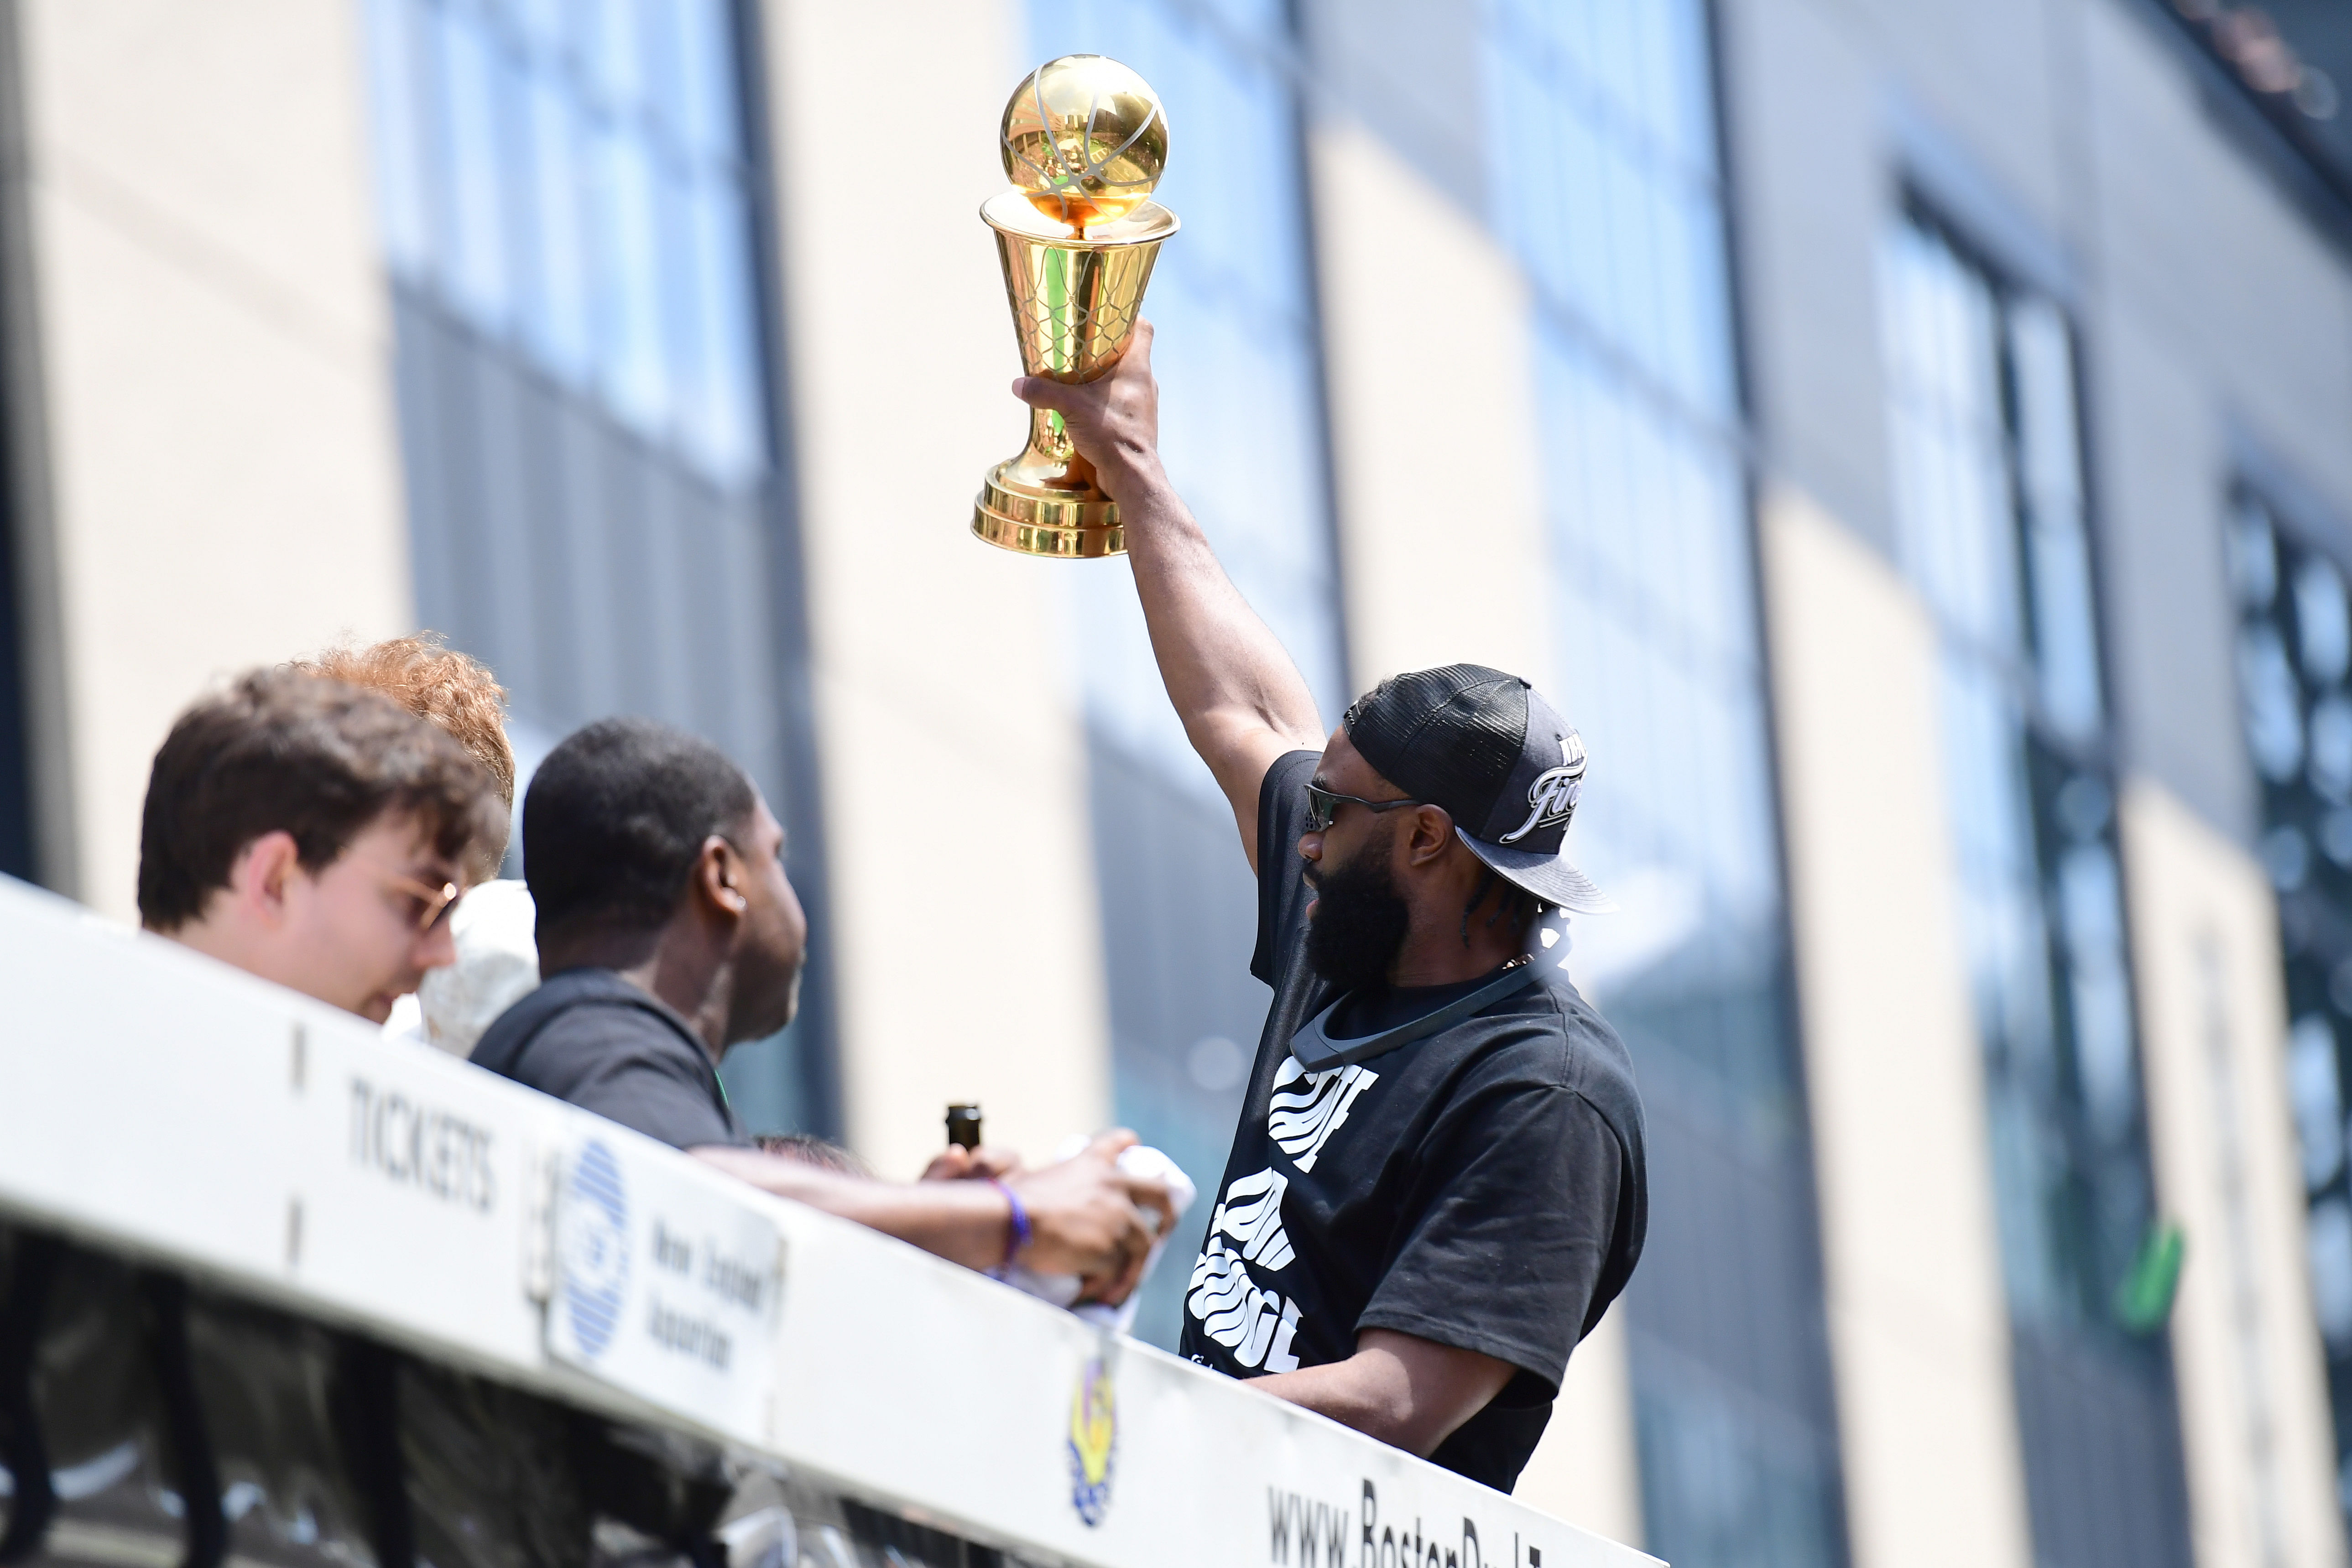 The Boston Celtics are already hoisting championship trophies without LeBron James or Bronny James.